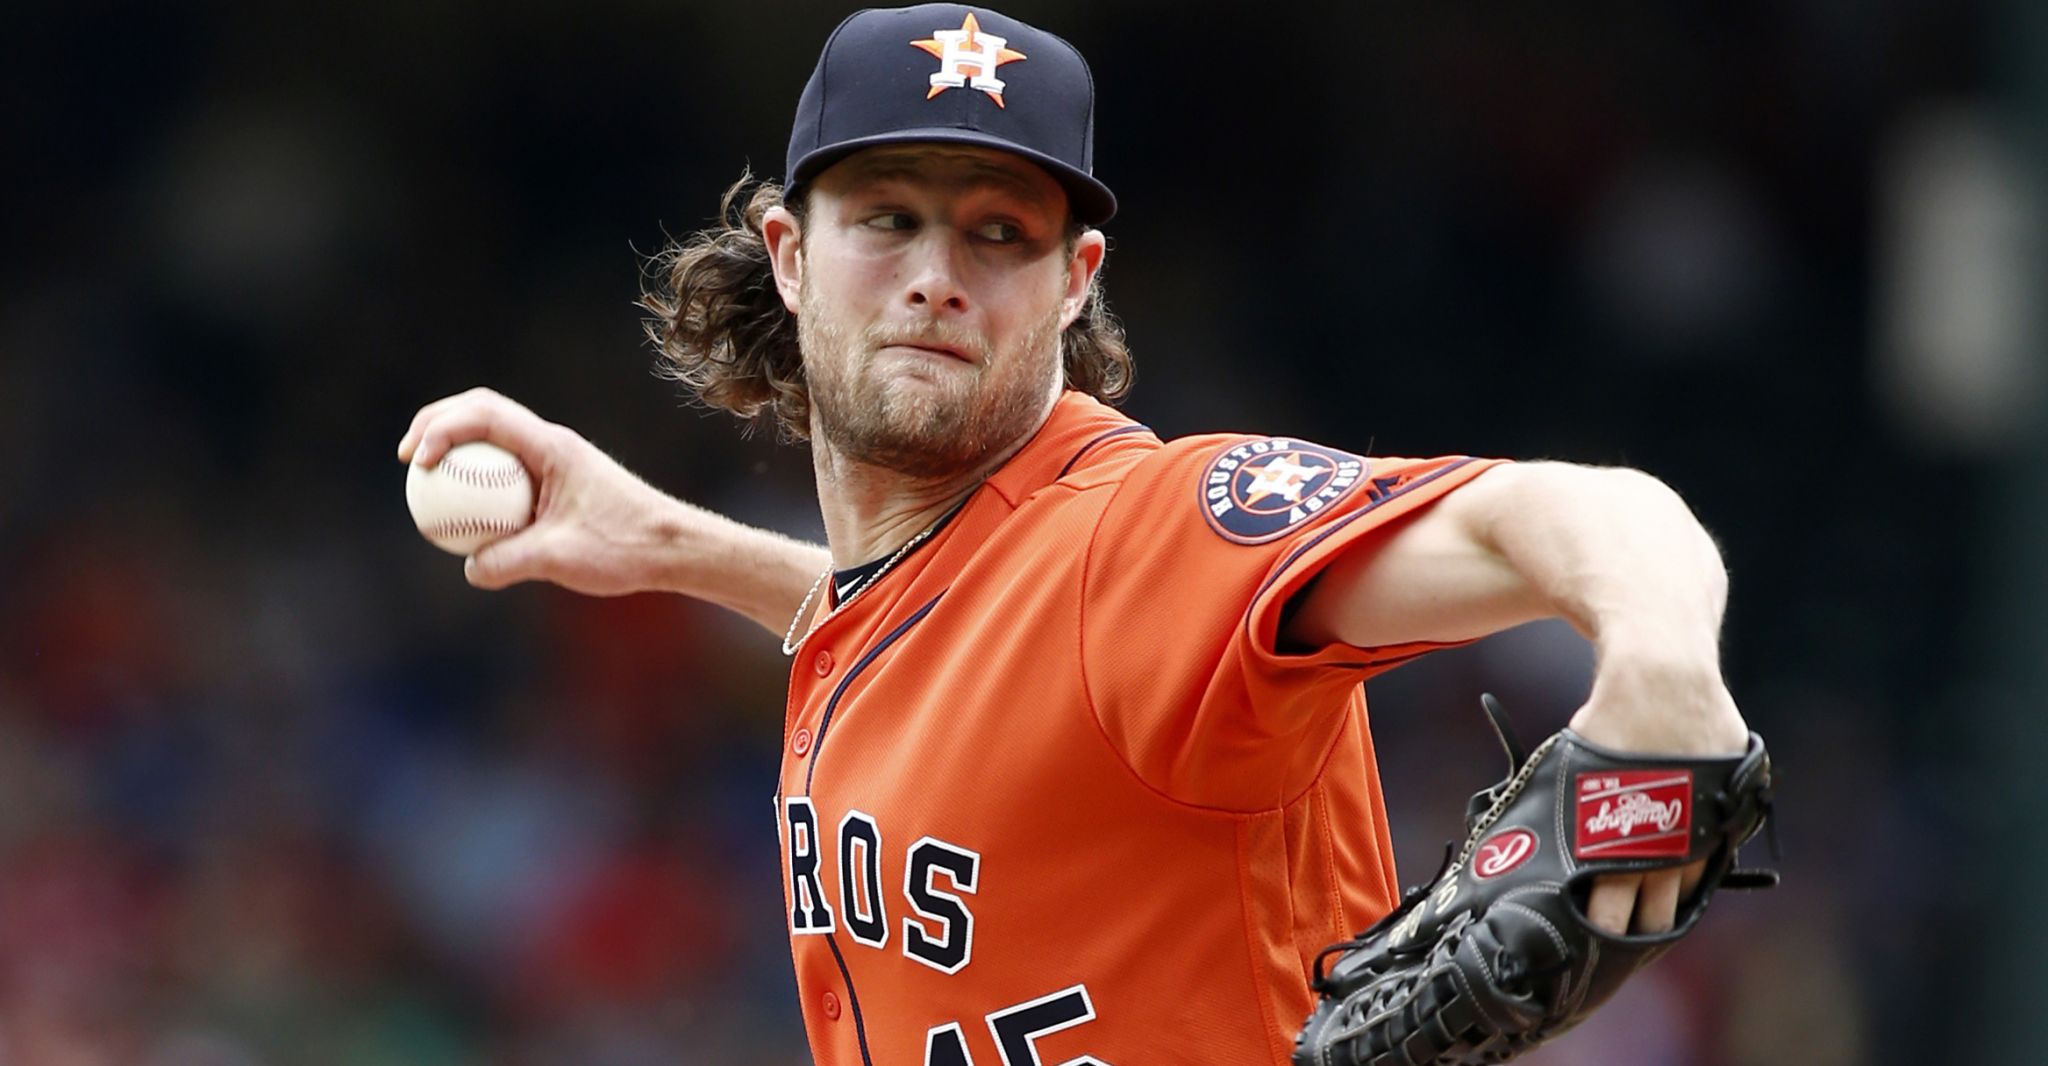 Gerrit Cole dazzled in debut as Astros take three of four from Rangers